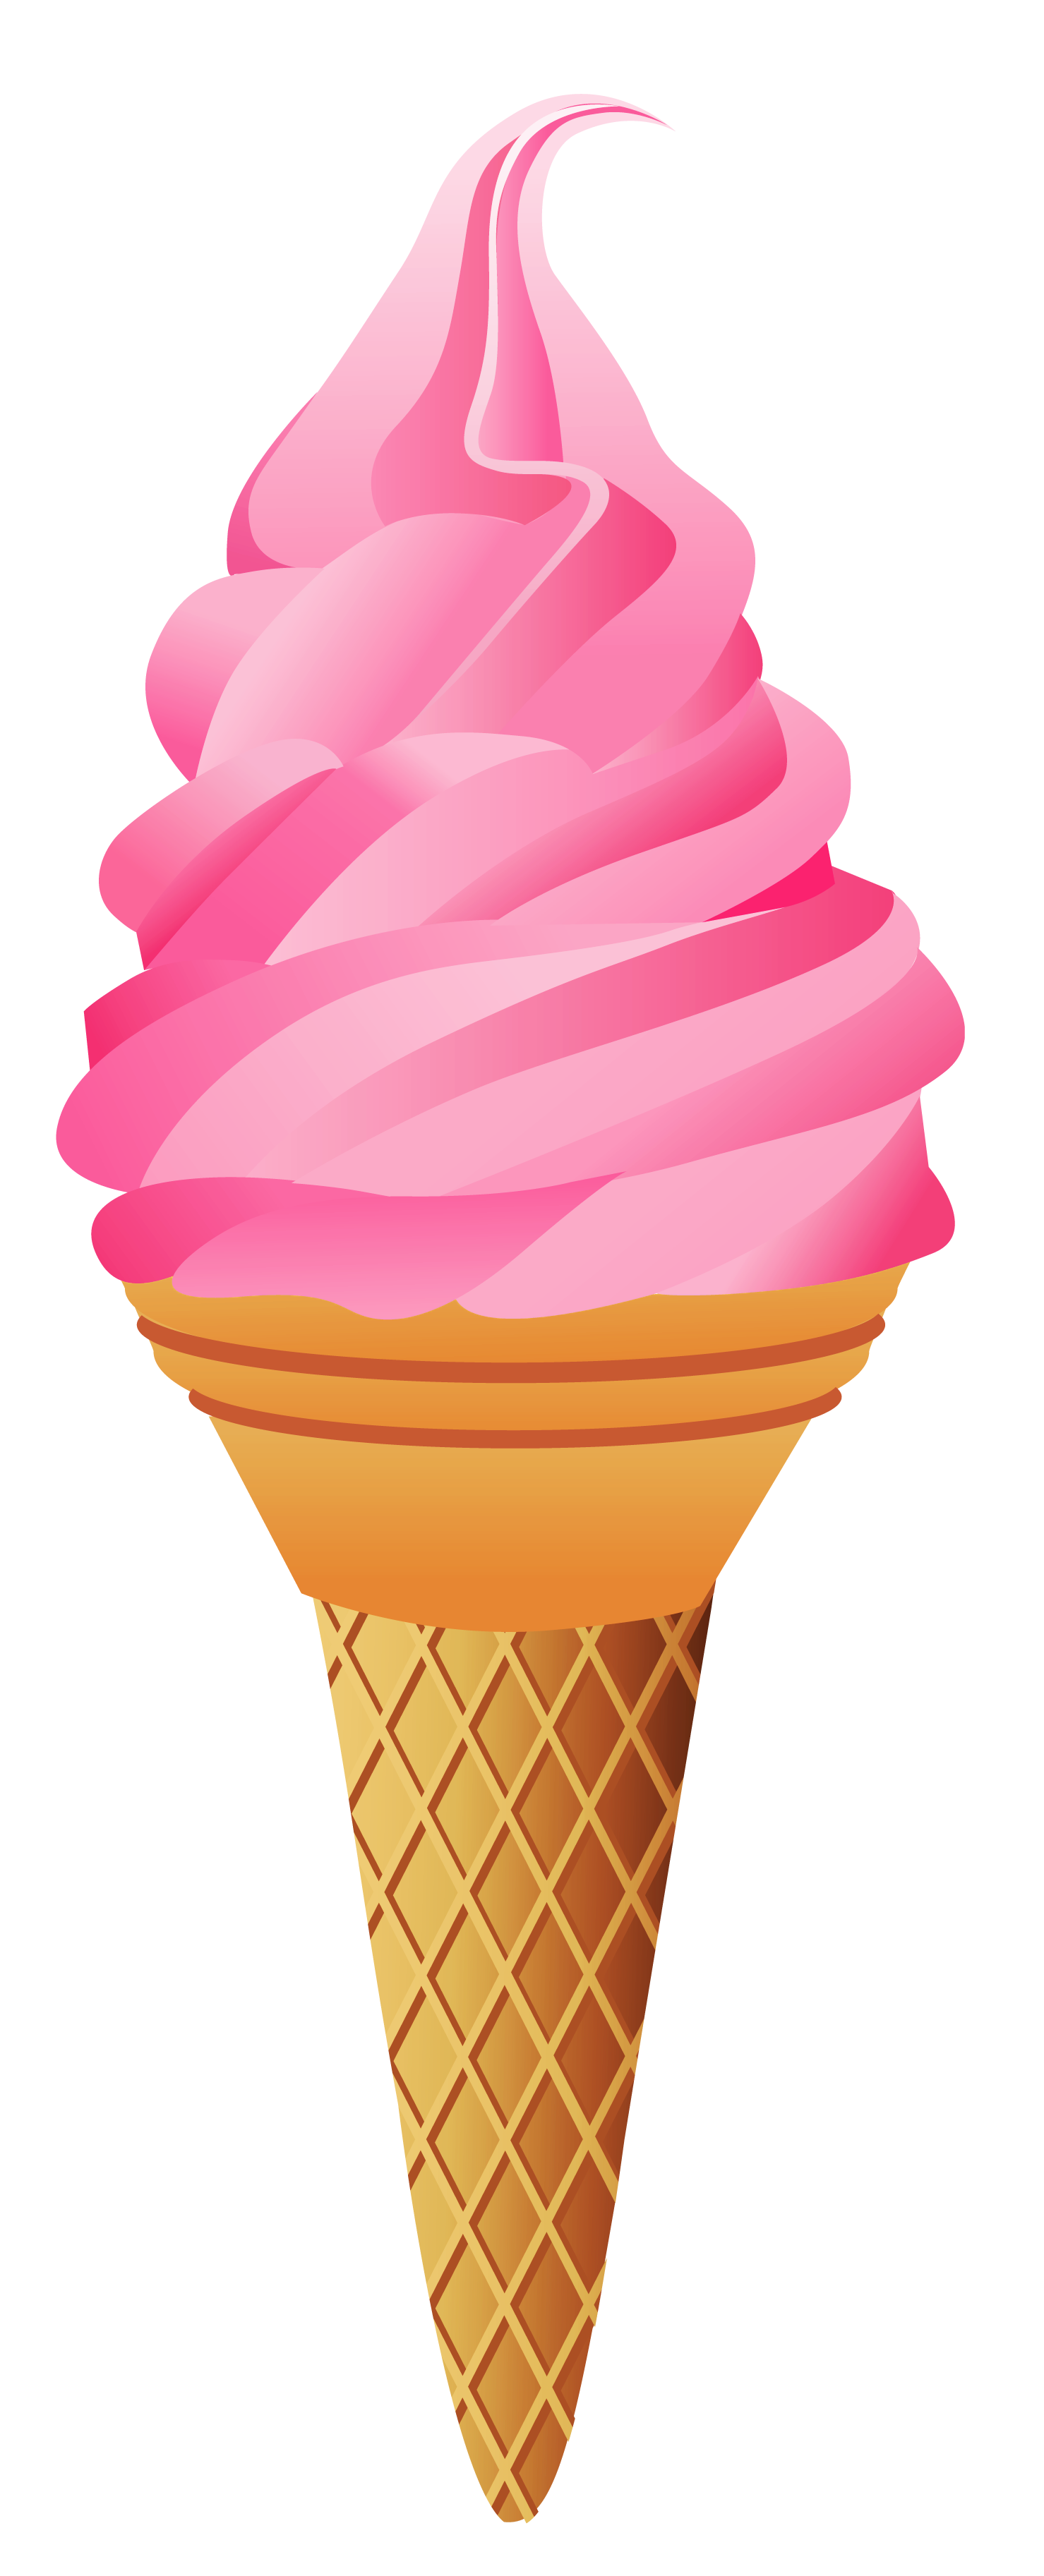 Ice cream cone cliparts and others art inspiration